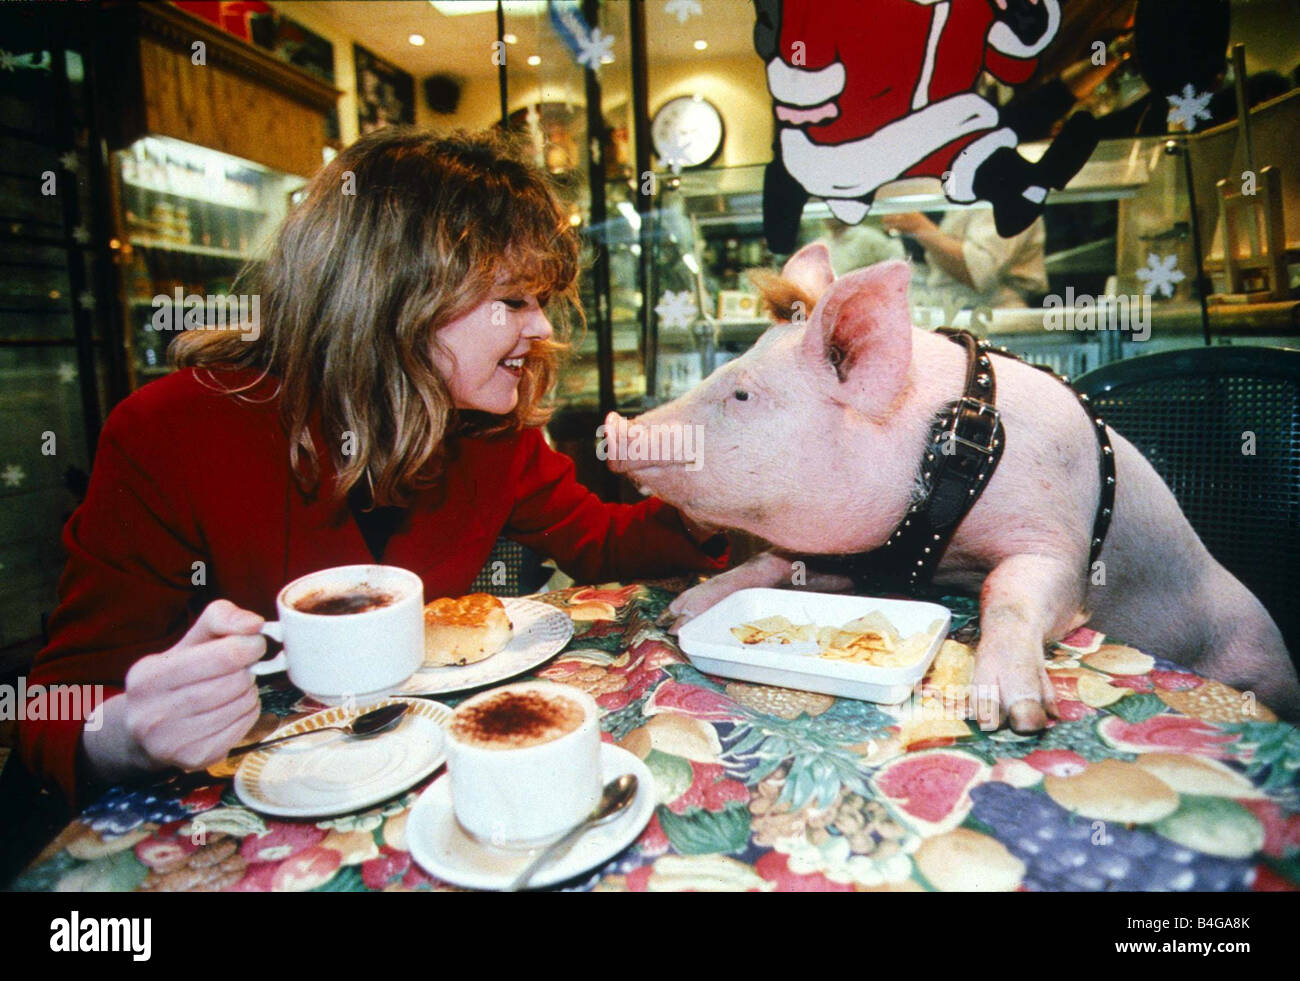 Young Women with Pig at Coffee Table December 1995 girl at table drinking  coffee with pig in harness Stock Photo - Alamy